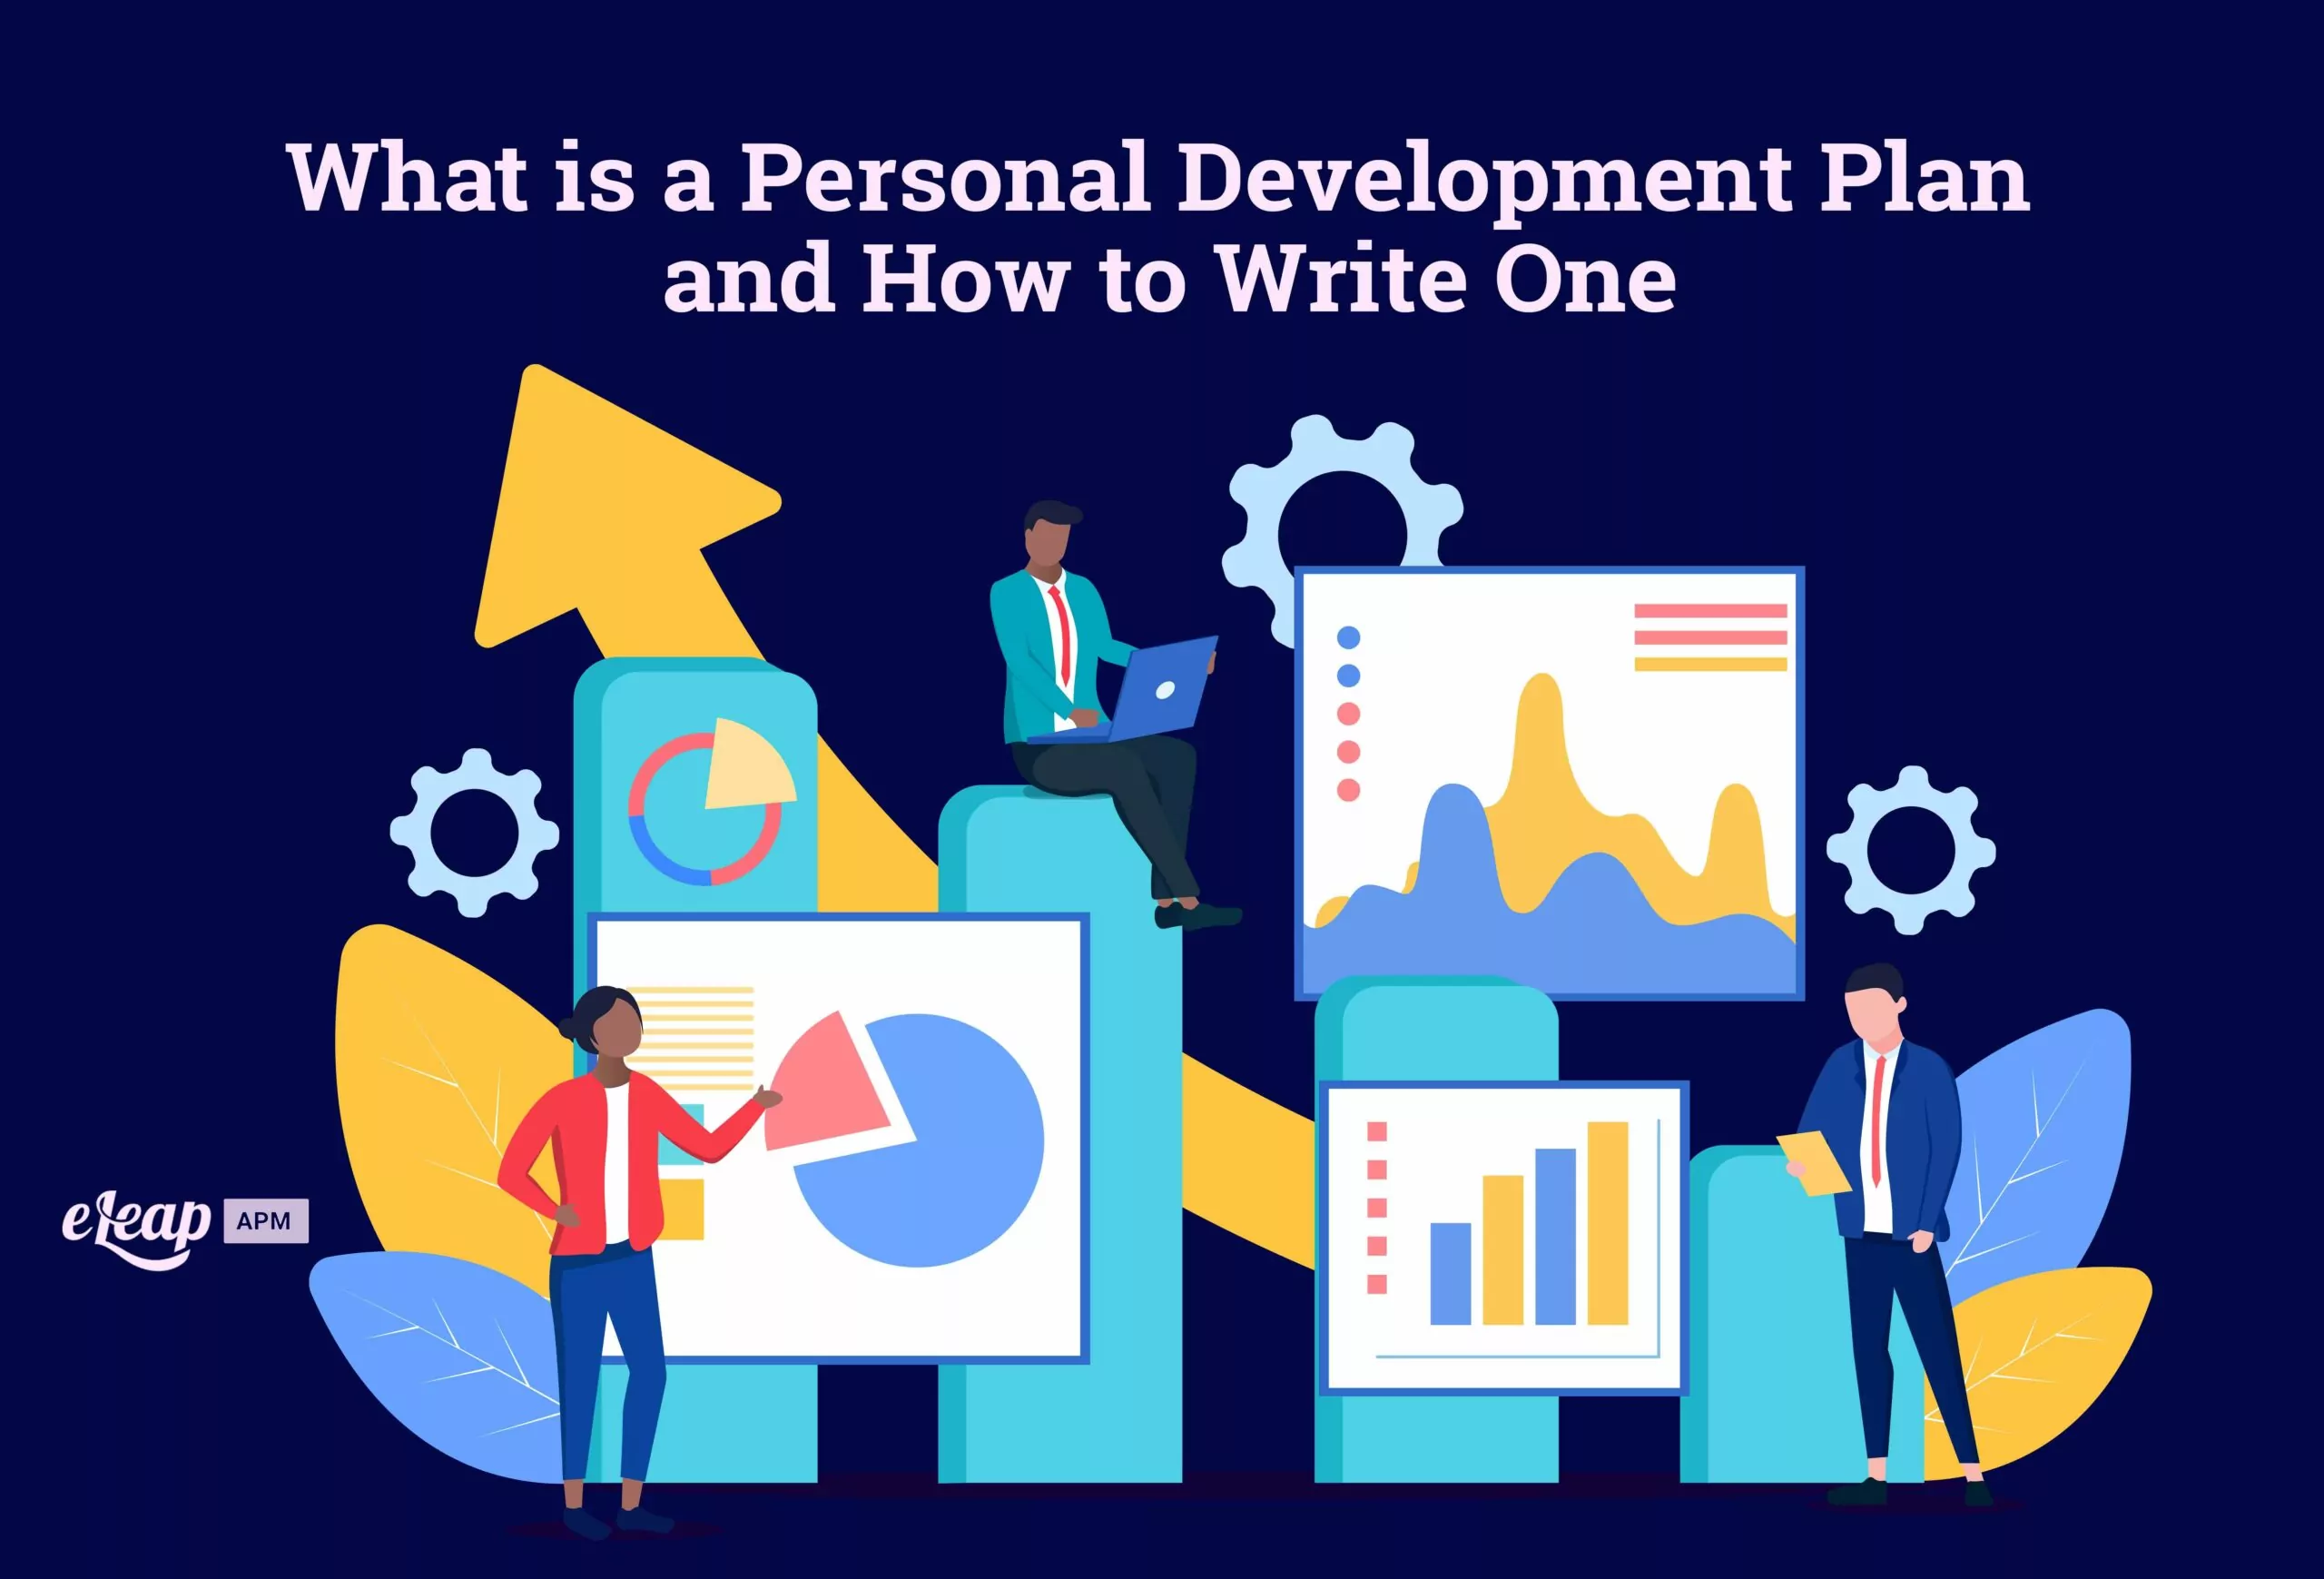 What is a Personal Development Plan and How to Write One